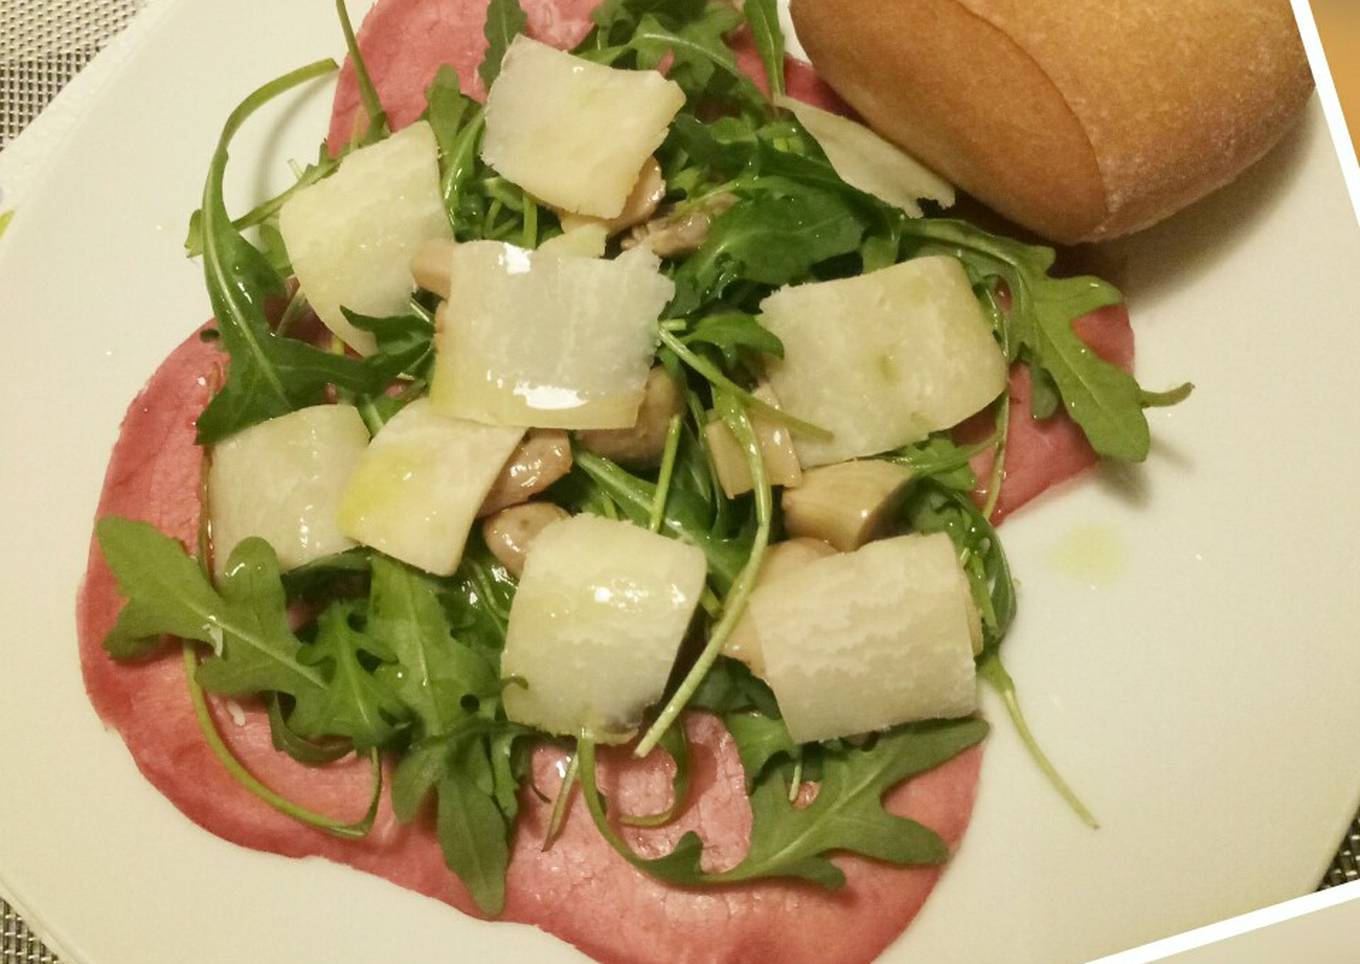 bresaola and rocket salad with my mushrooms in oil